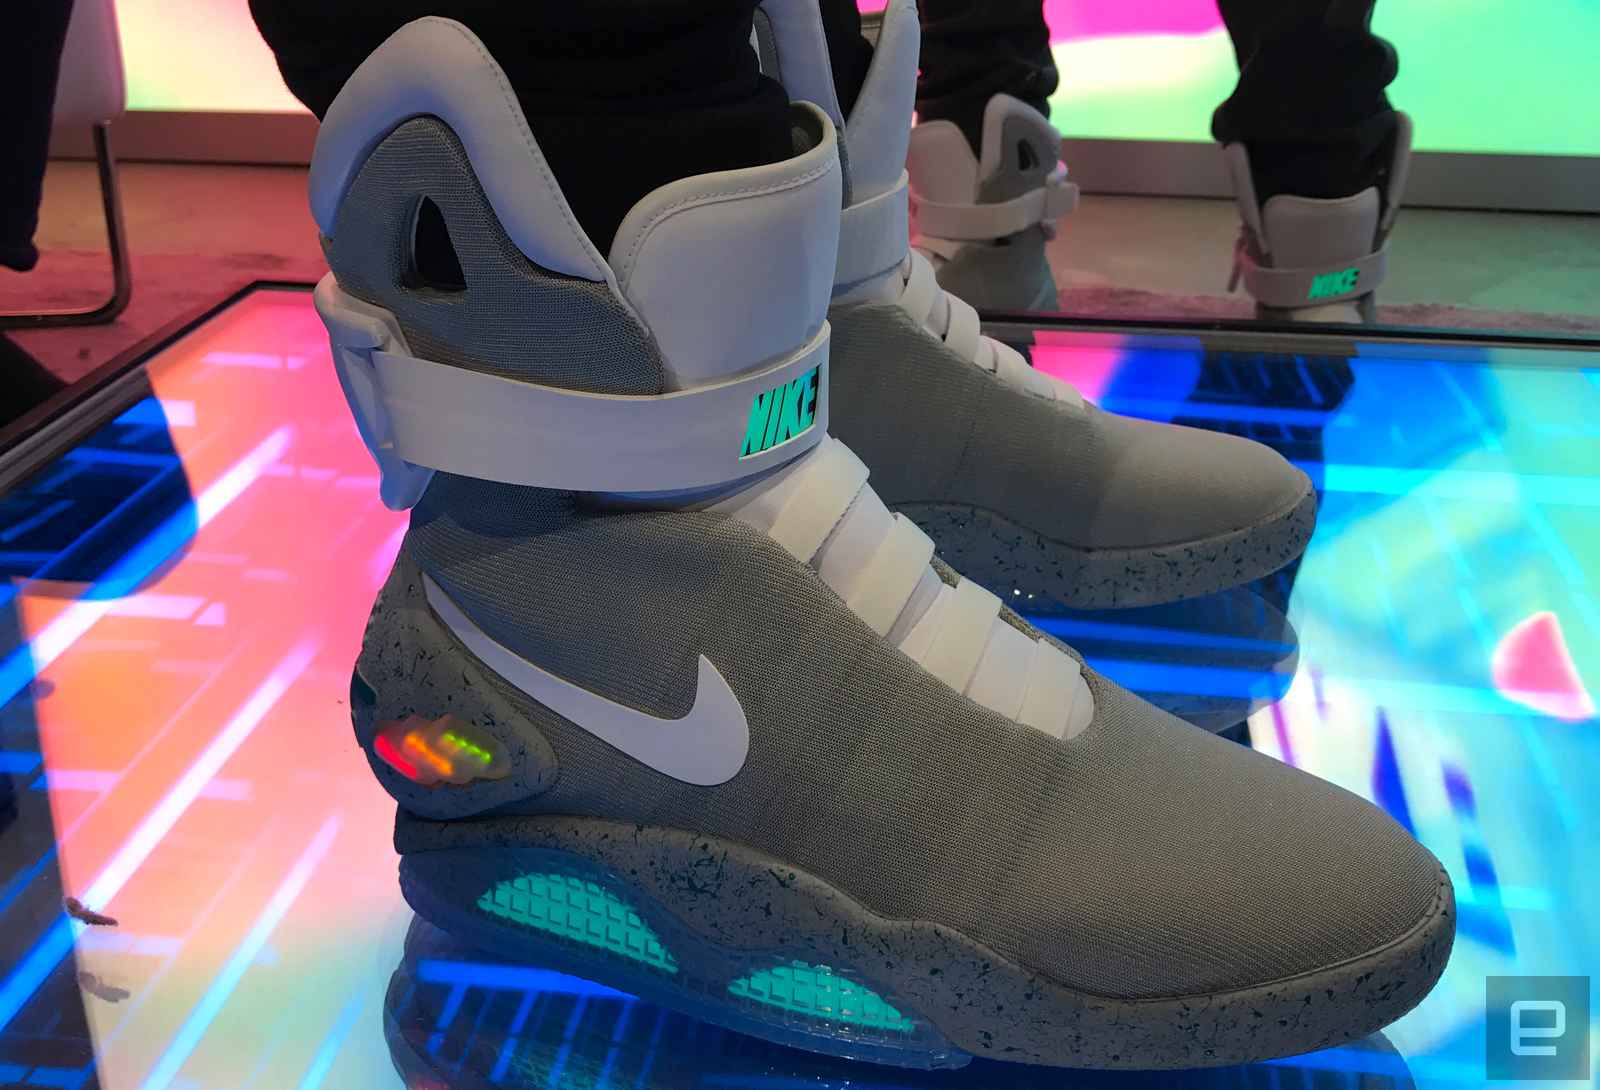 self-lacing Mags hot, won't catch fire | Engadget